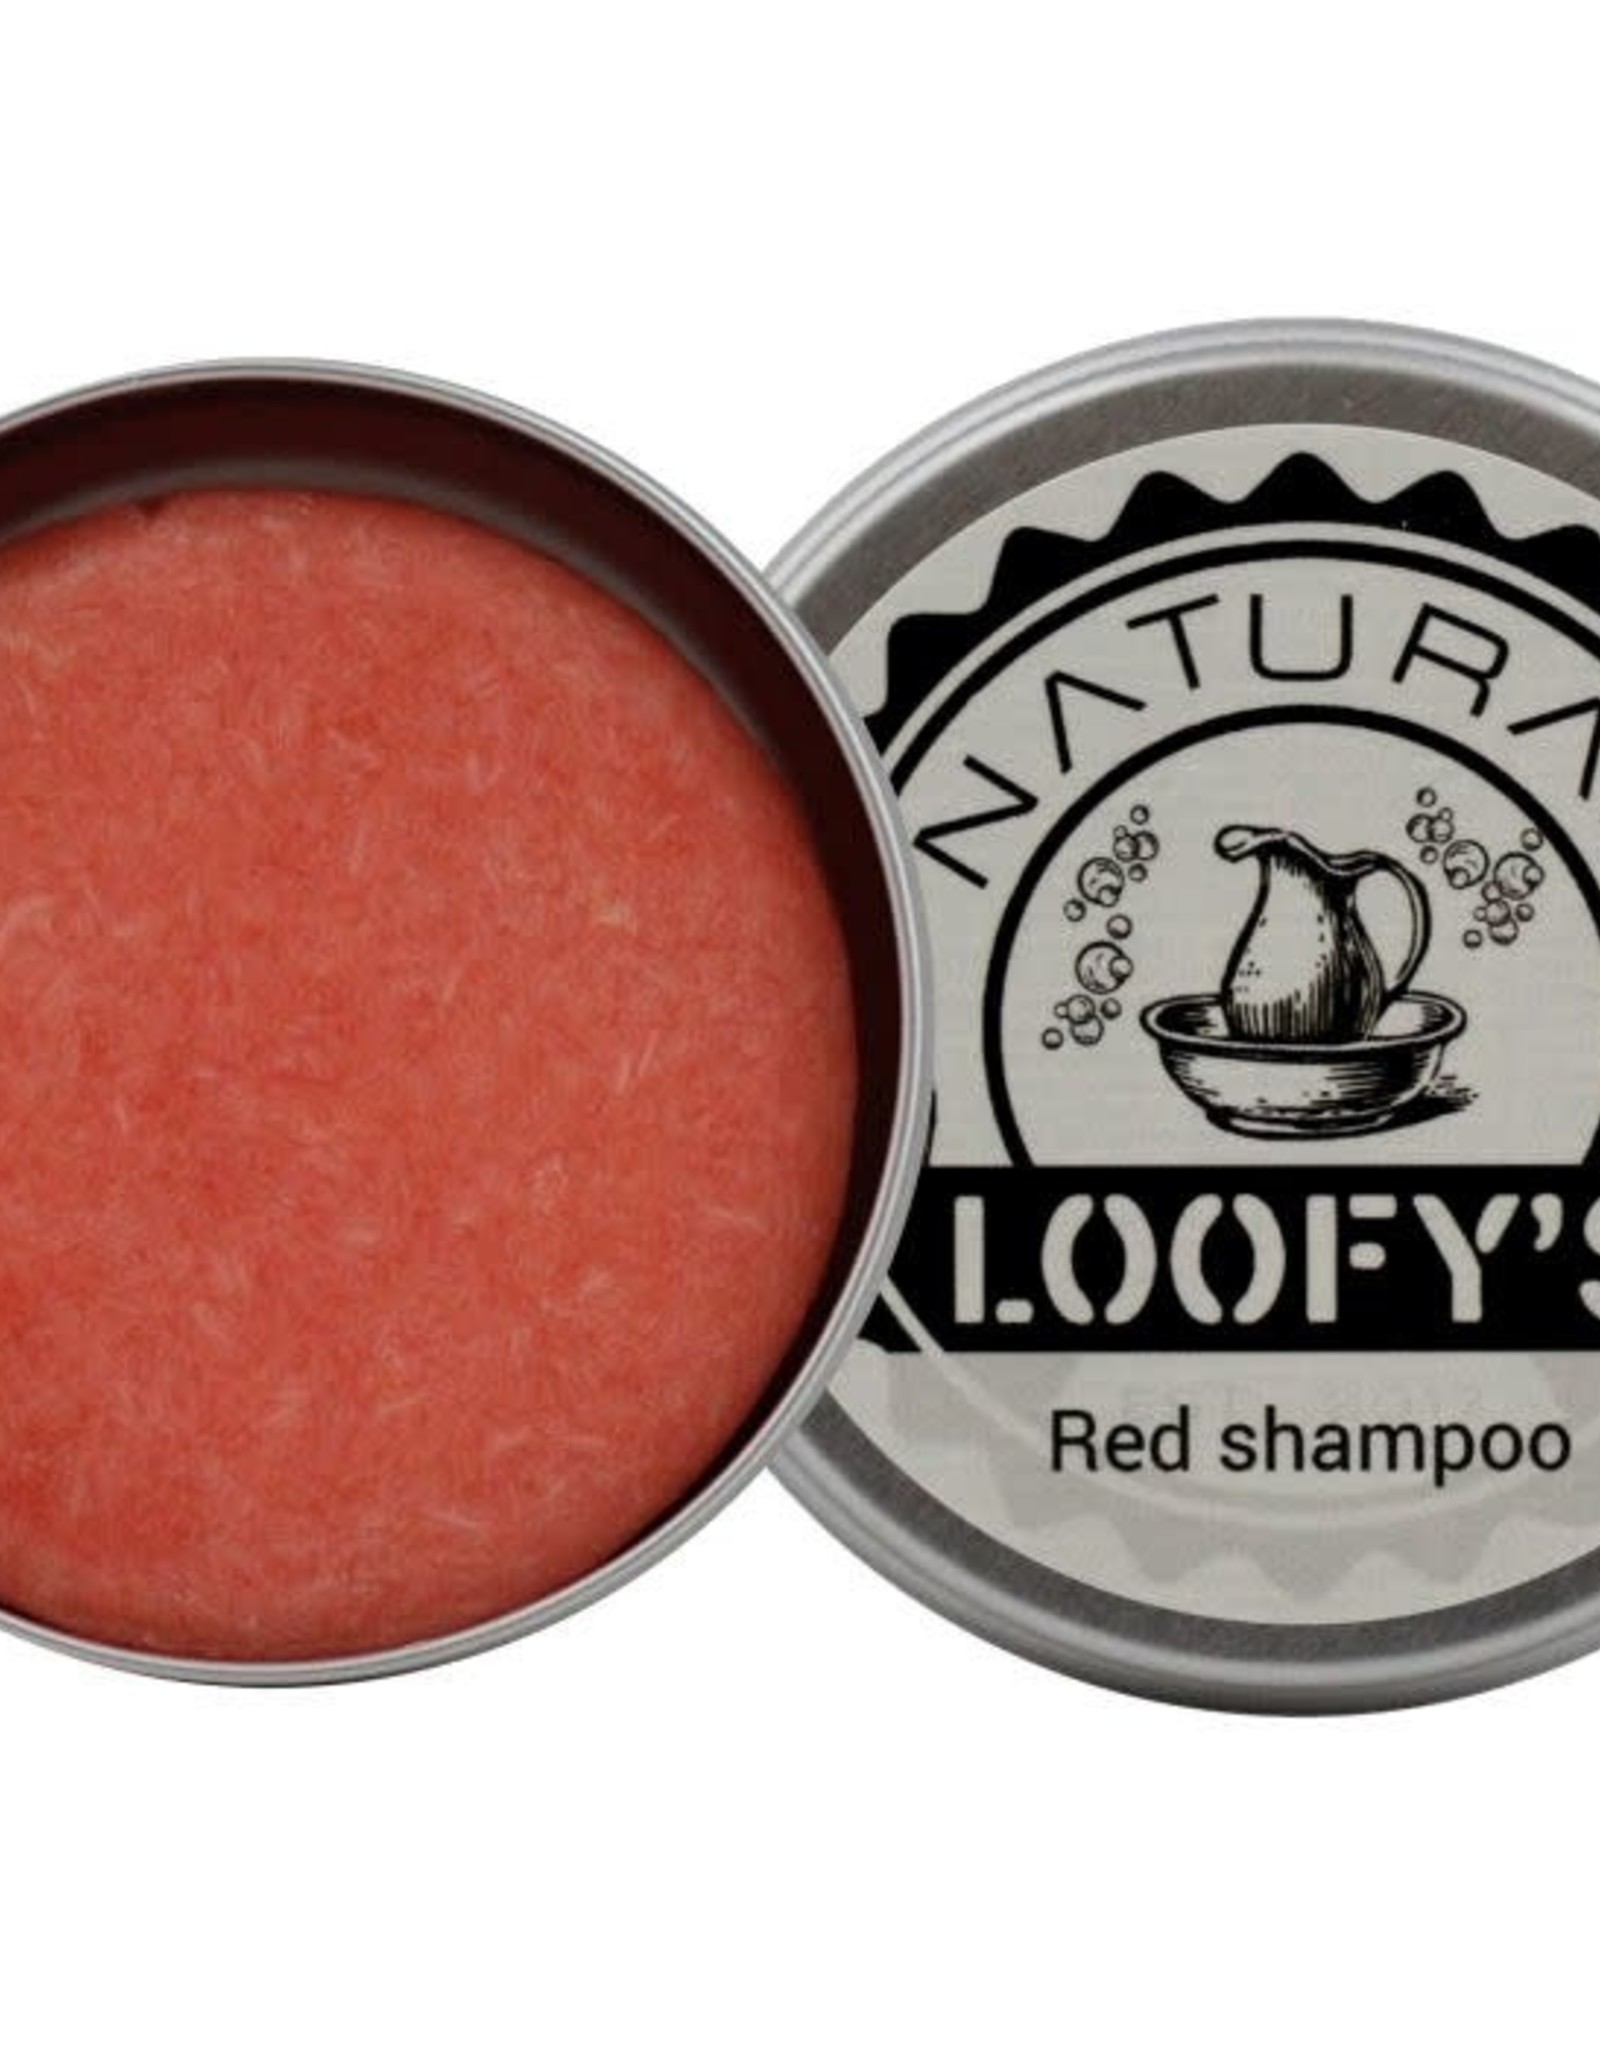 Loofys Loofys - Shampoo Red Alle haartypes 70g